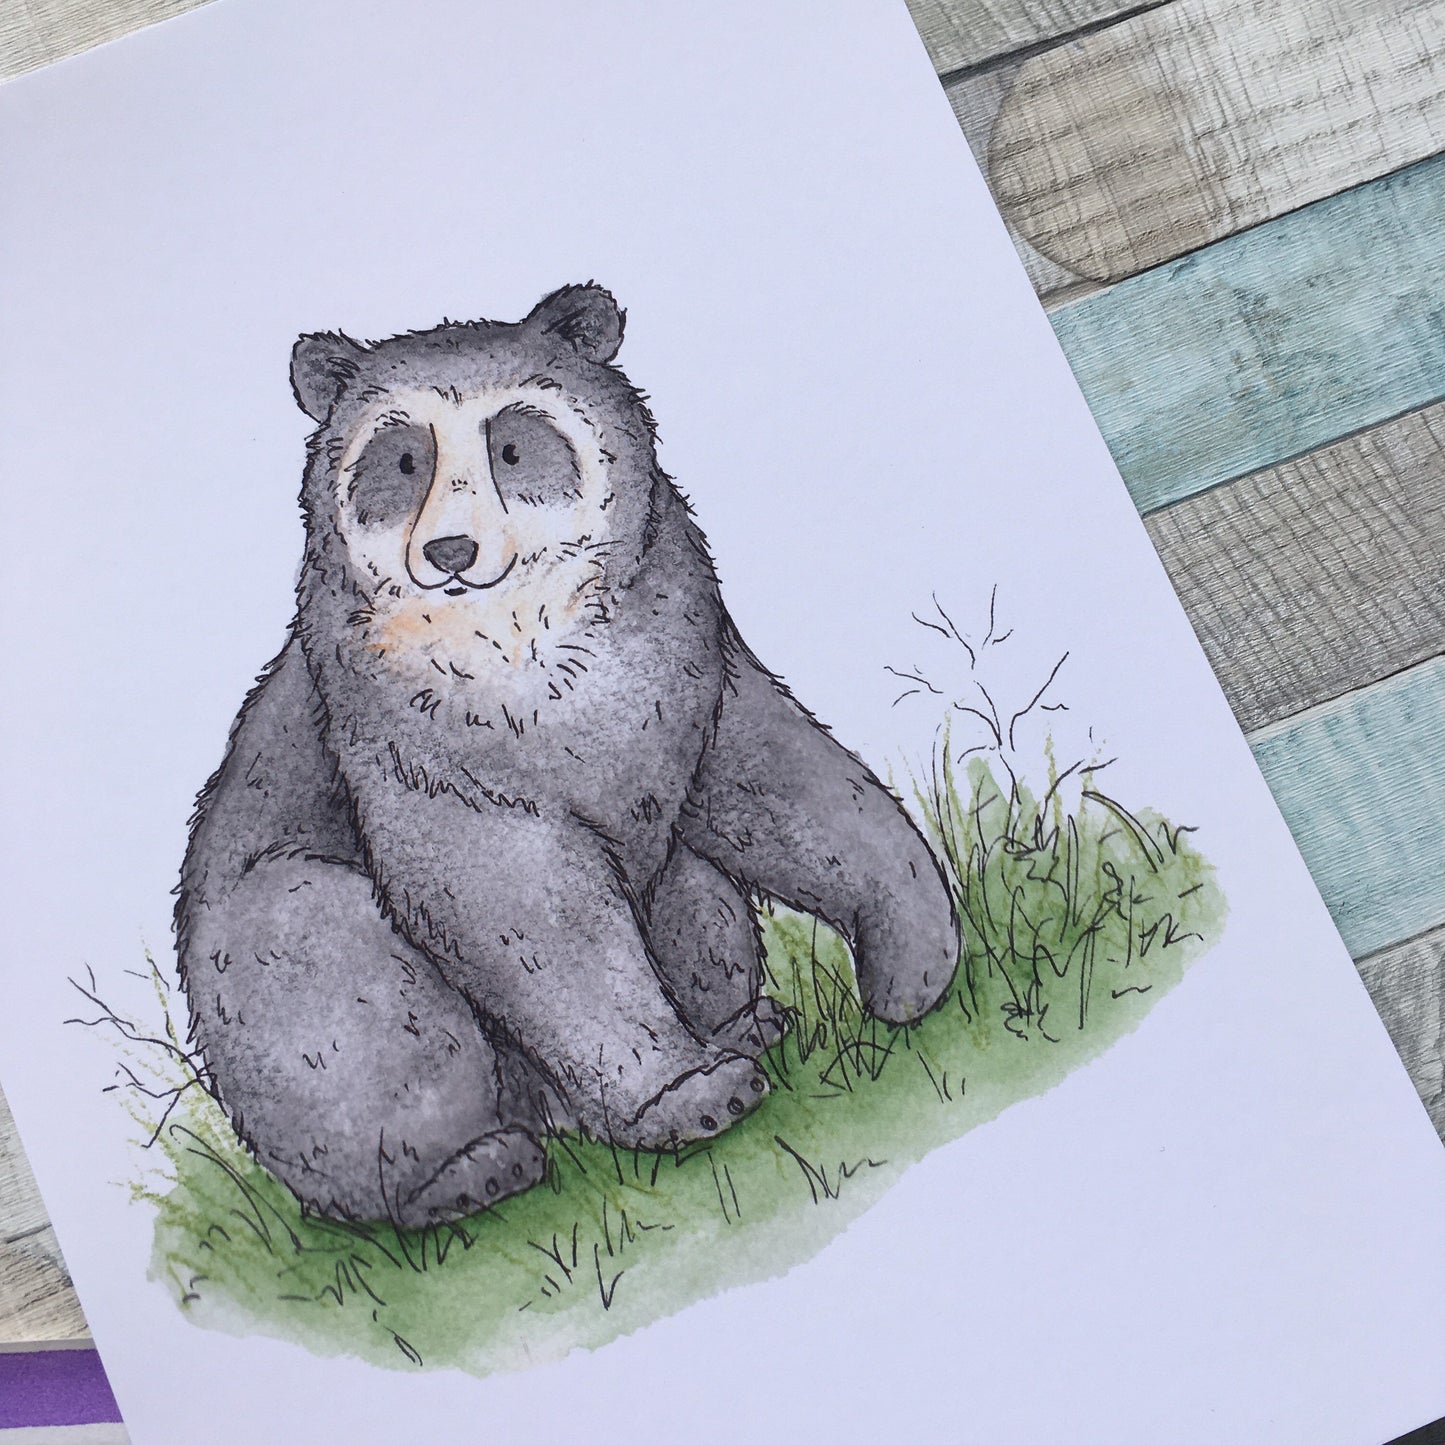 Spectacled bear - Bears of the World Series - Watercolour painting, art print sizes A5 6x4 240gsm paper animal art bear gift